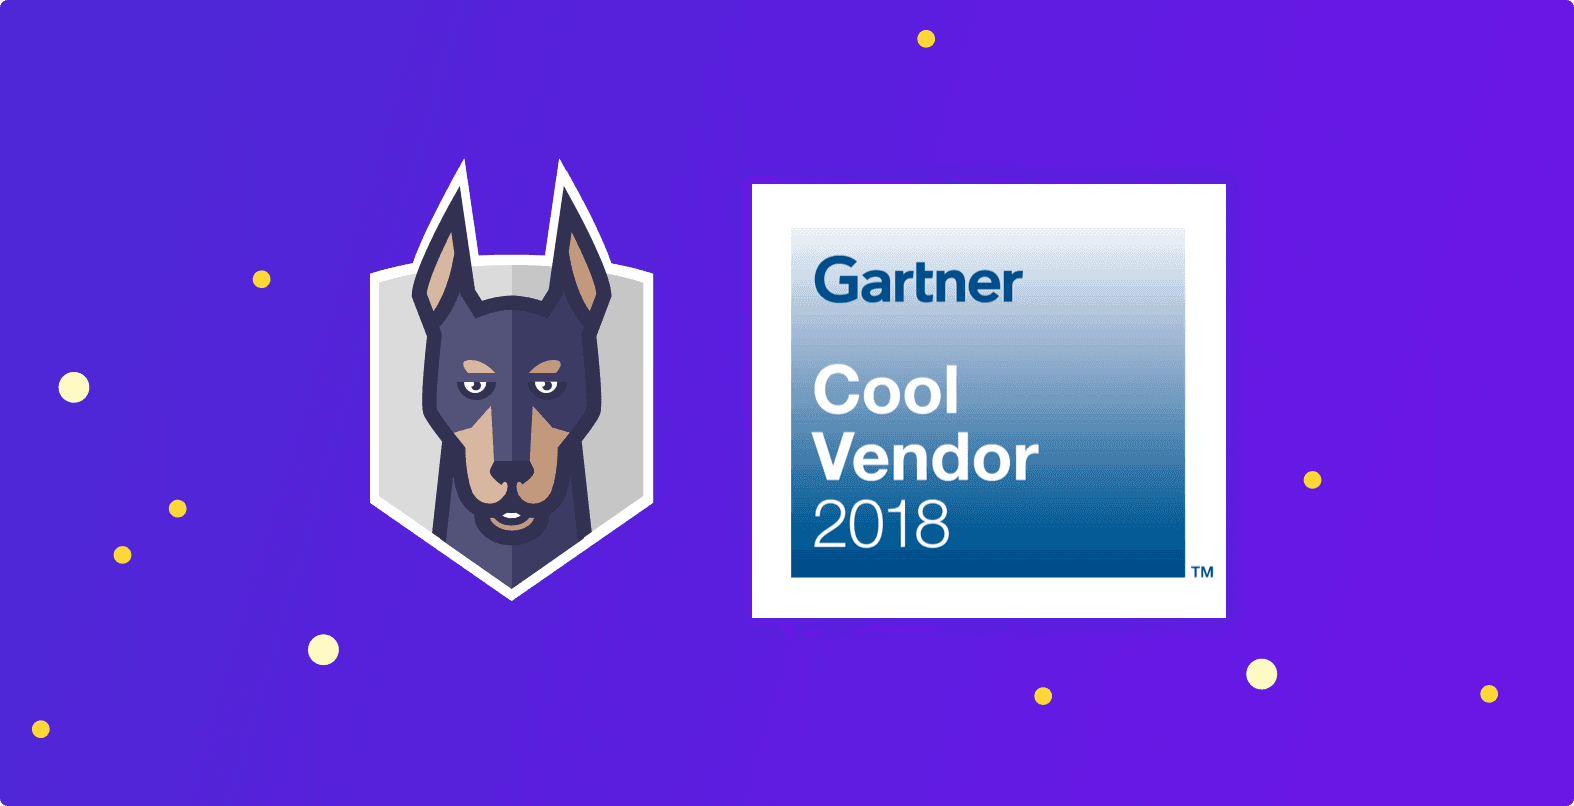 wordpress-sync/Snyk-Named-a-2018-Gartner-Cool-Vendor-in-Application-and-Data-Security-small